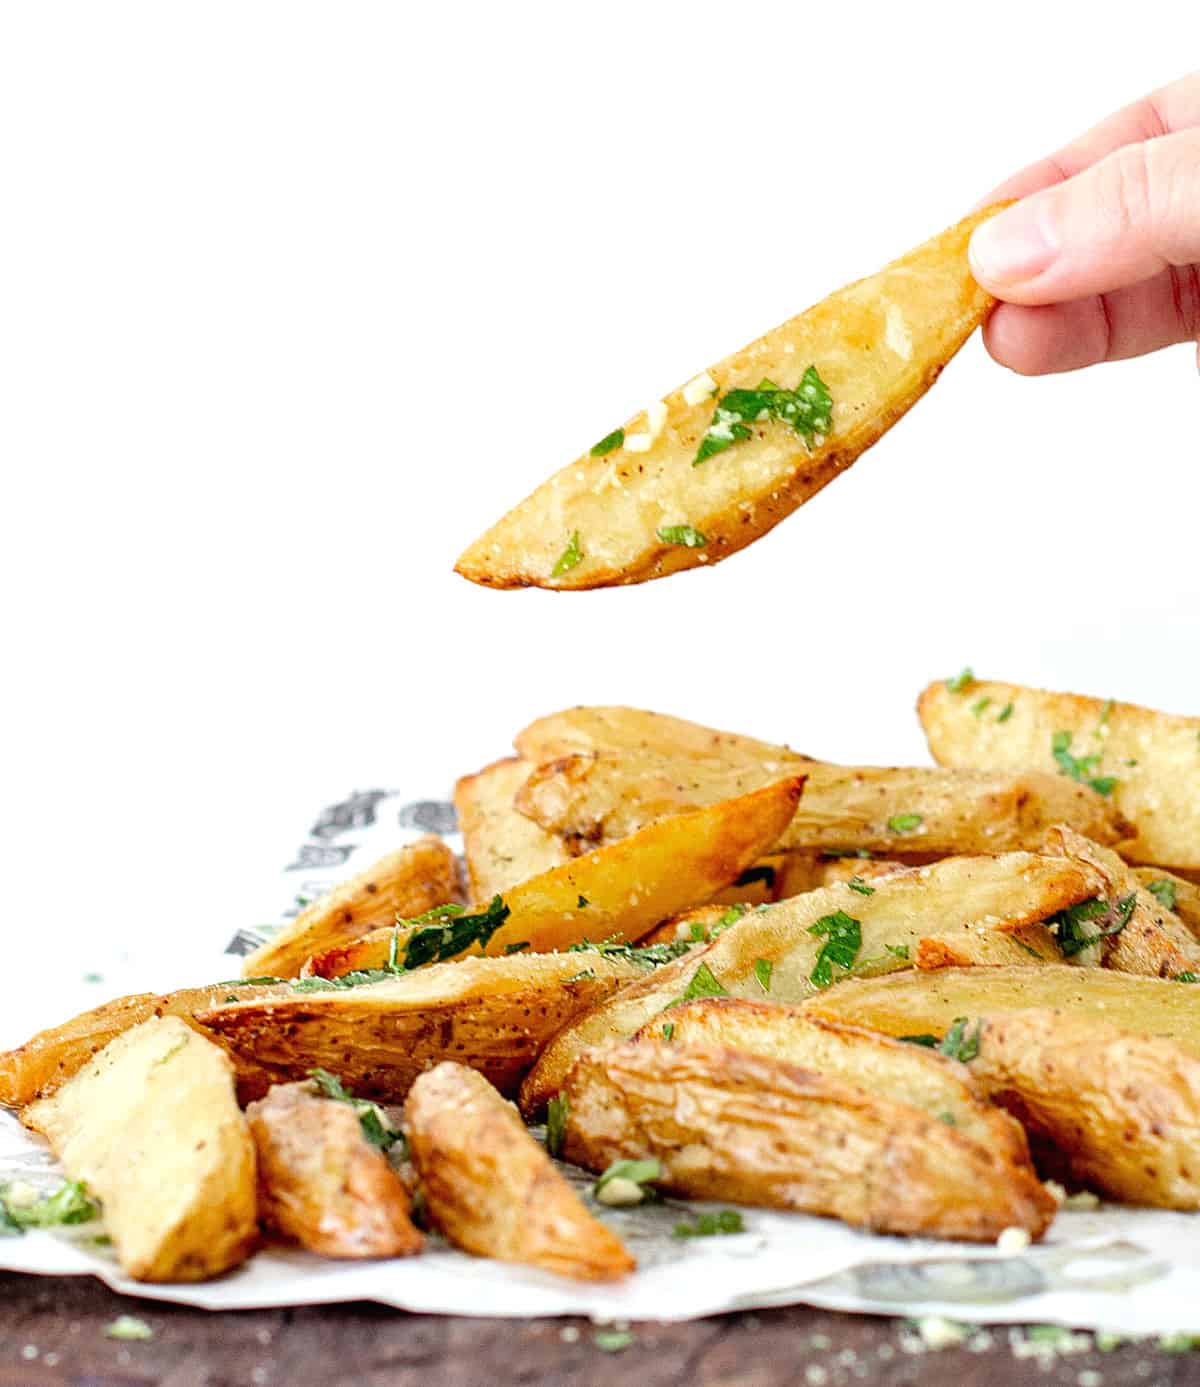 Hand holding potato wedge beneath a mound of potato wedges on a wooden board.